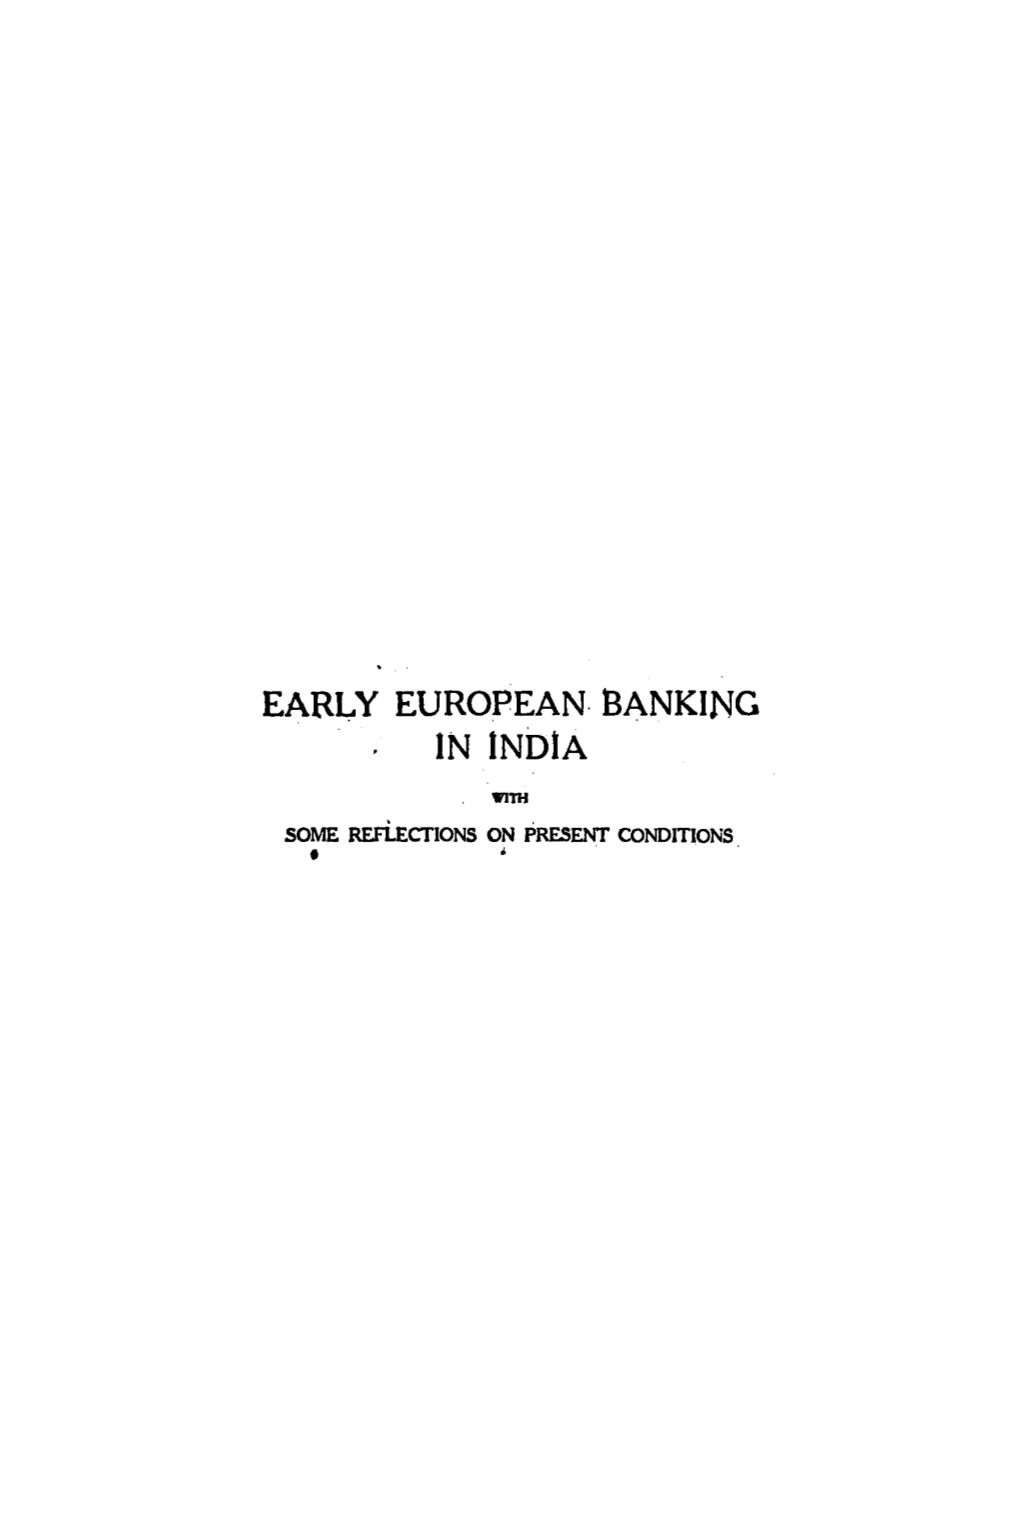 Early European Banking in India